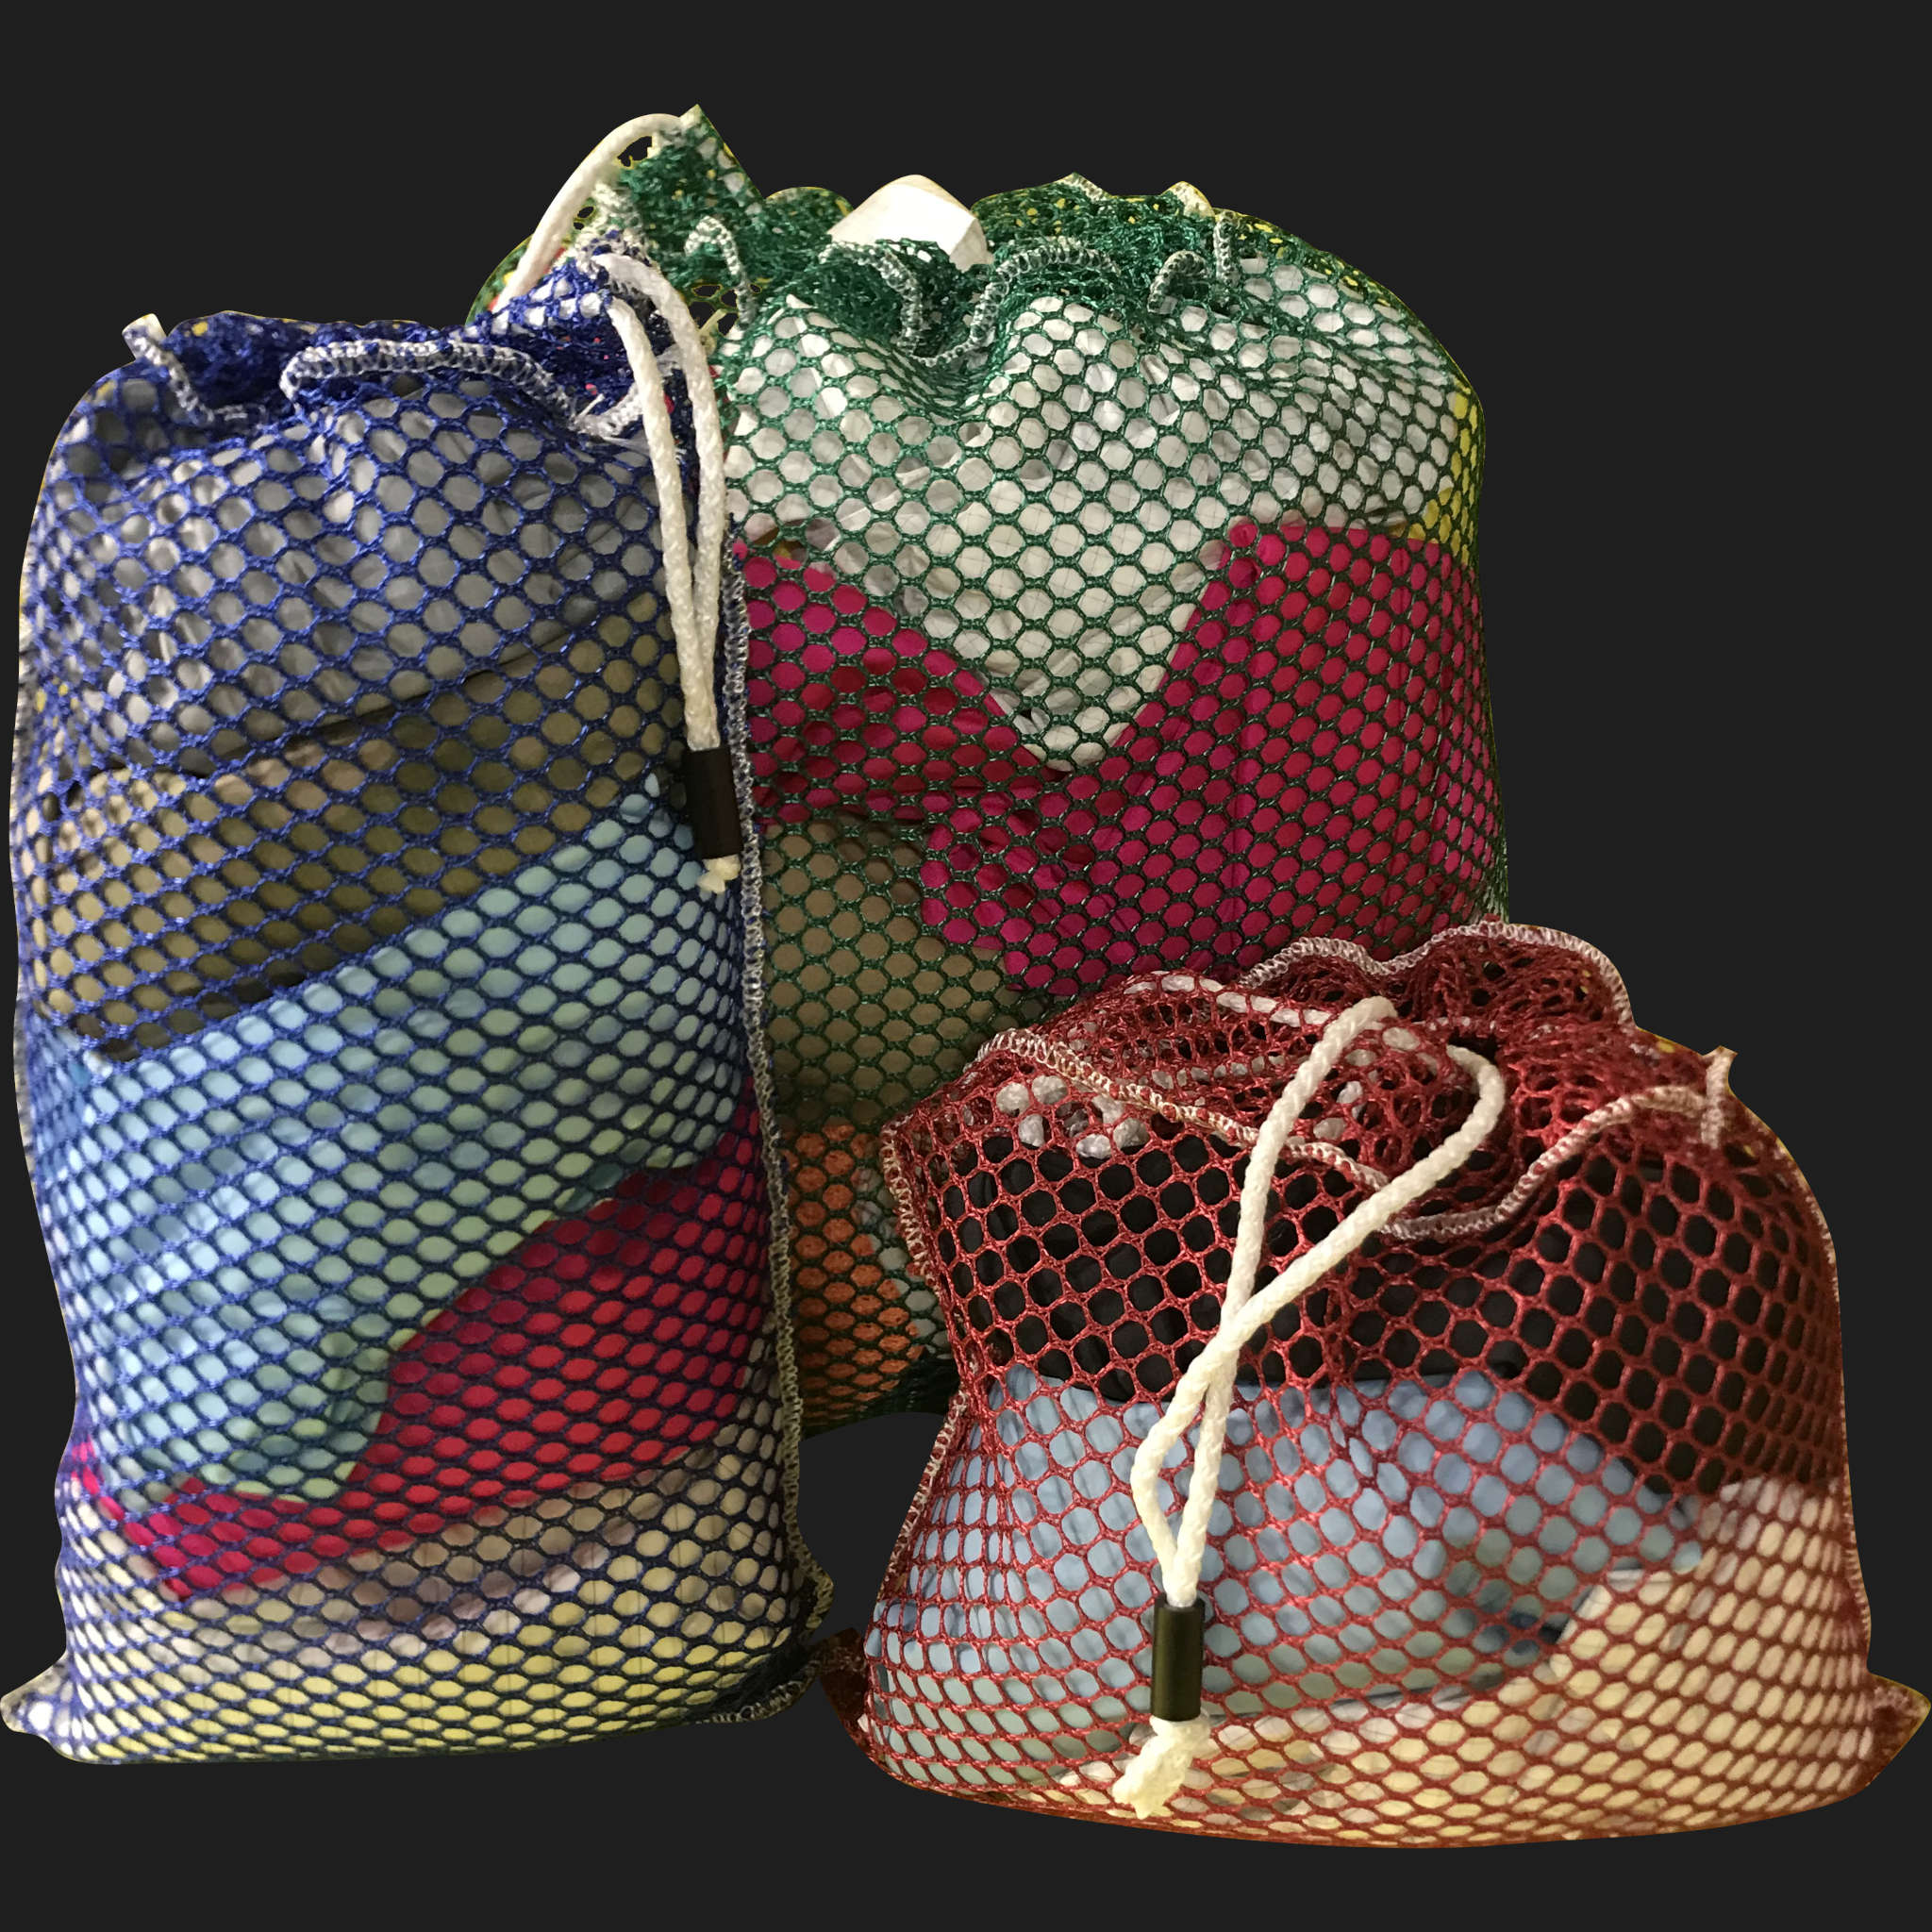 46" x 68" Customized Mesh-Net-Laundry Bags Heavy Duty with Cord and barrellock closure